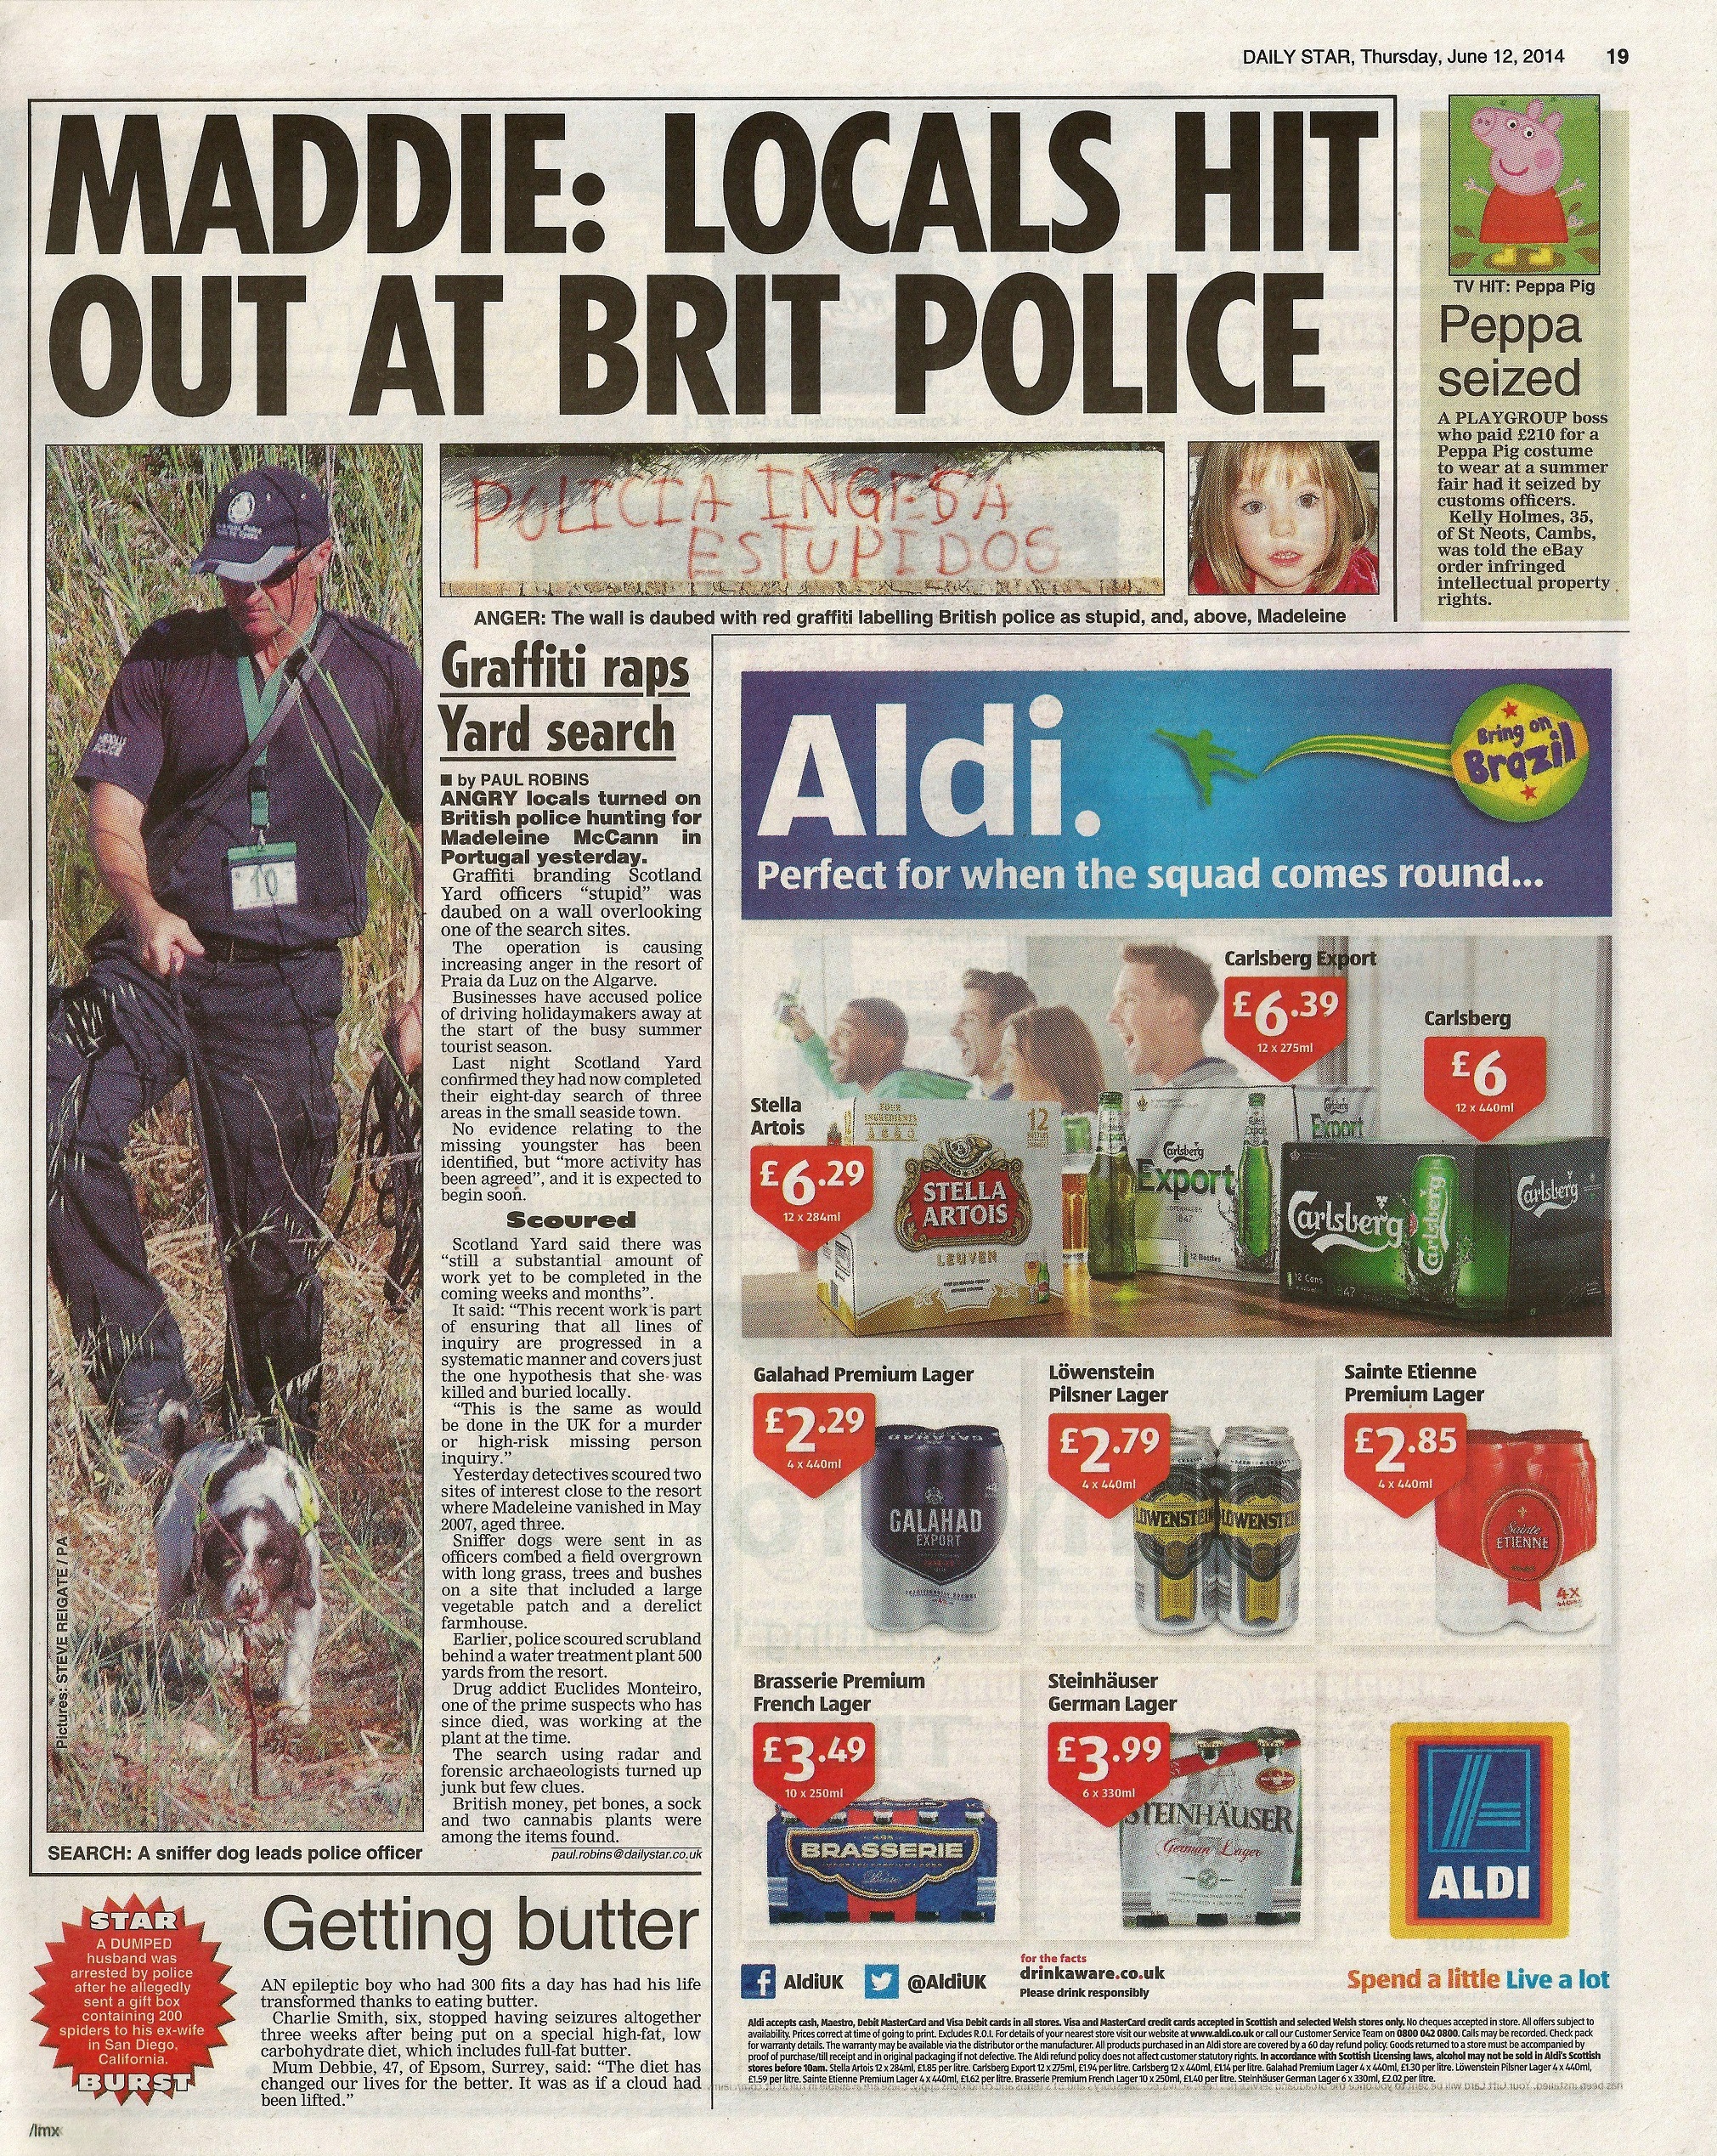 Daily Star, 12 June 2014 (paper edition, page 19)